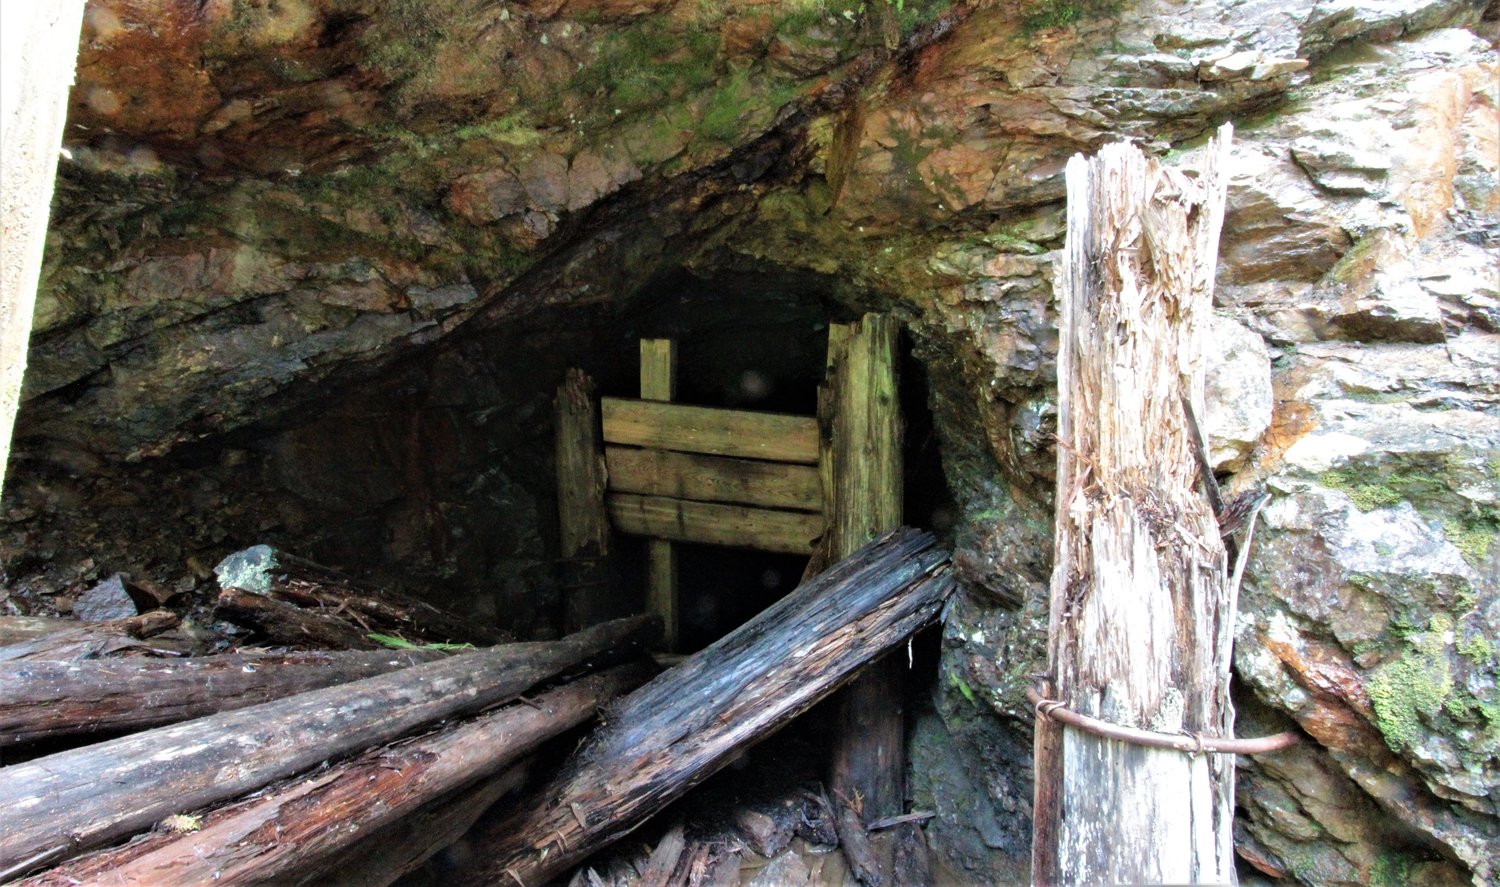 An abandoned mining adit in the Donut Hole. Many conservation groups and First Nations have asked for sites like these to be cleaned.